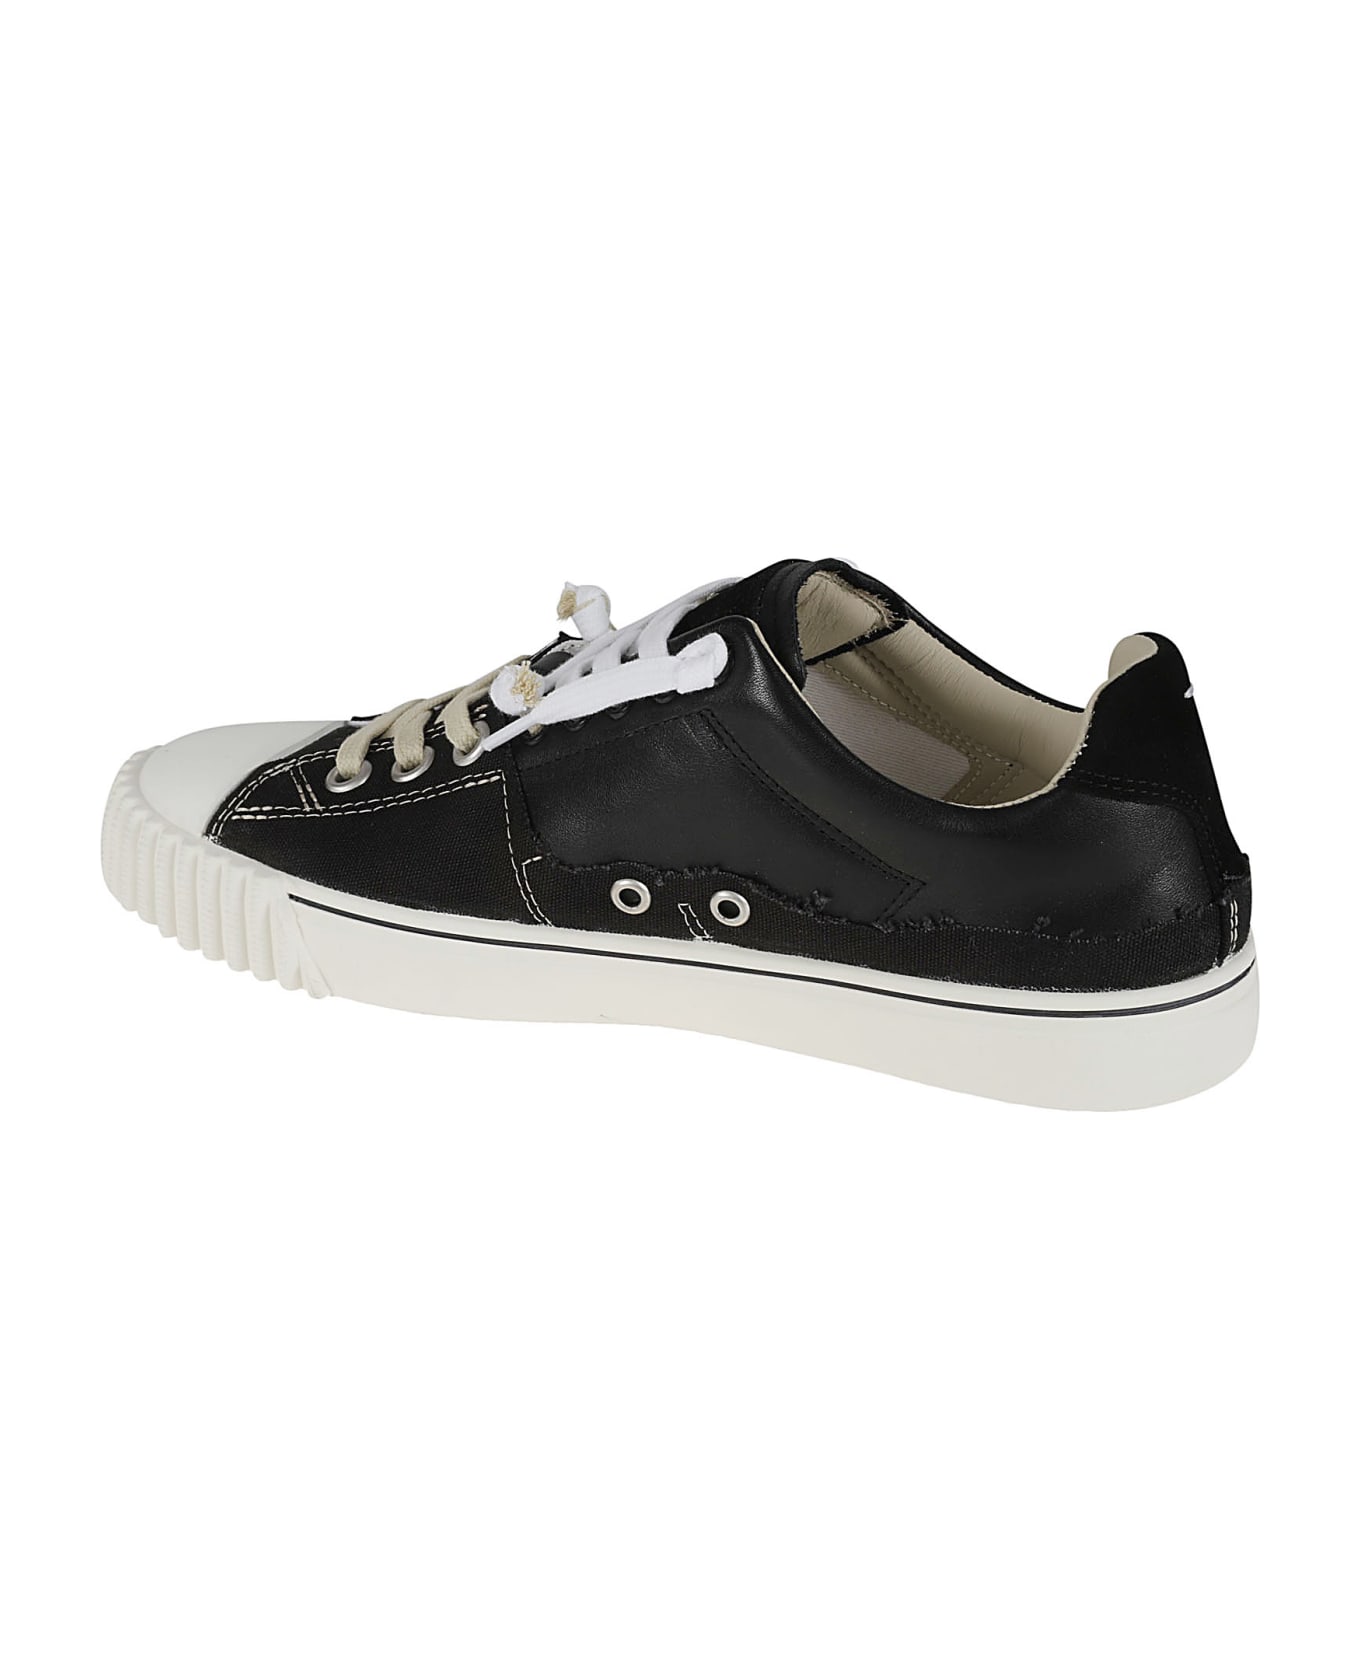 Maison Margiela New Evolution Leather Sneakers - H8588